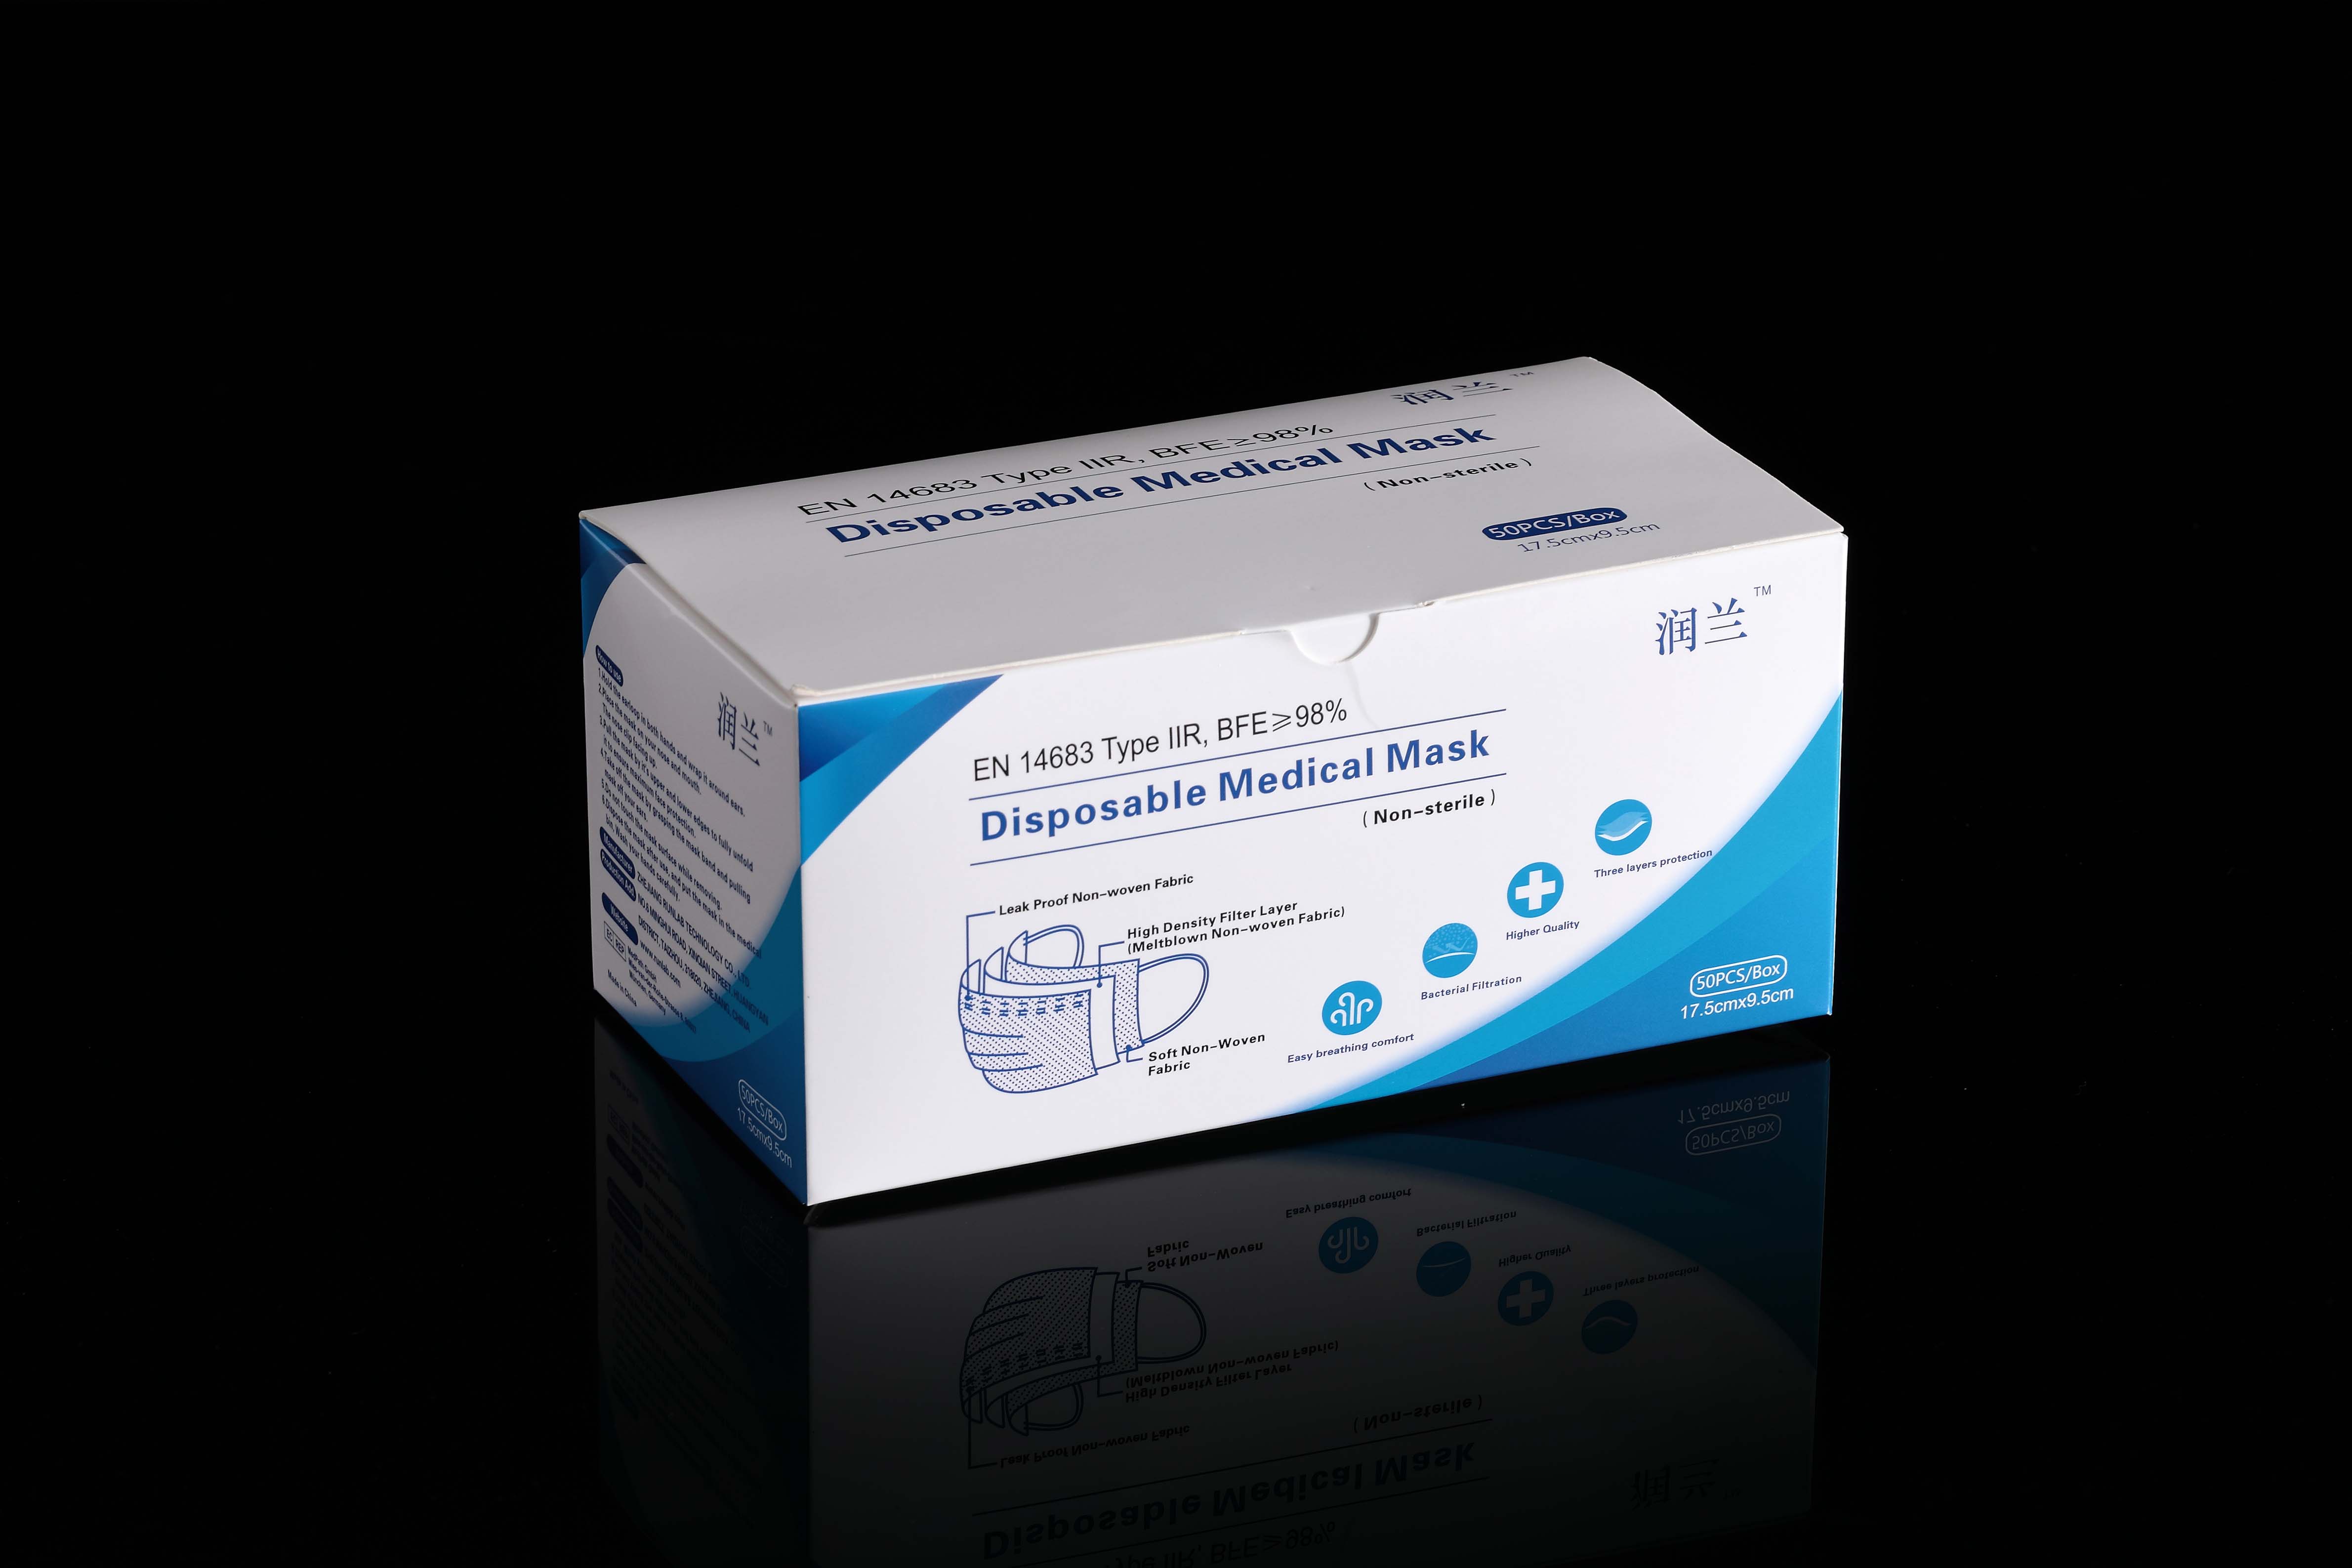 Disposable Medical Mask (Non-sterile) Type B